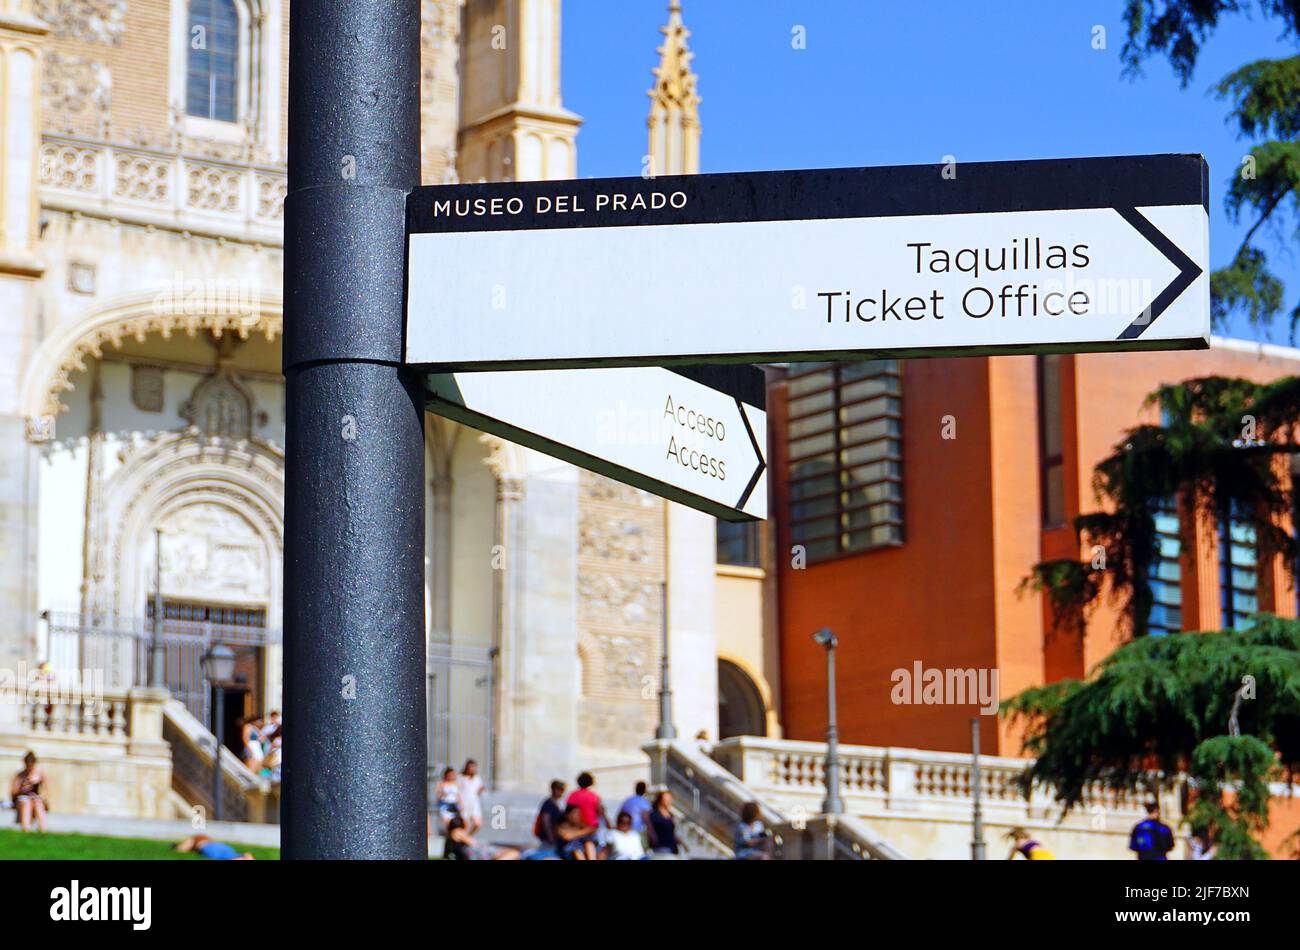 Street sign Ticket Office Taquillas from Prado Museum Museo del Prado in Madrid.With Saint Jerome the Royal (San Jerónimo el Real) at the background.An early 16th-century Roman Catholic church. Stock Photo